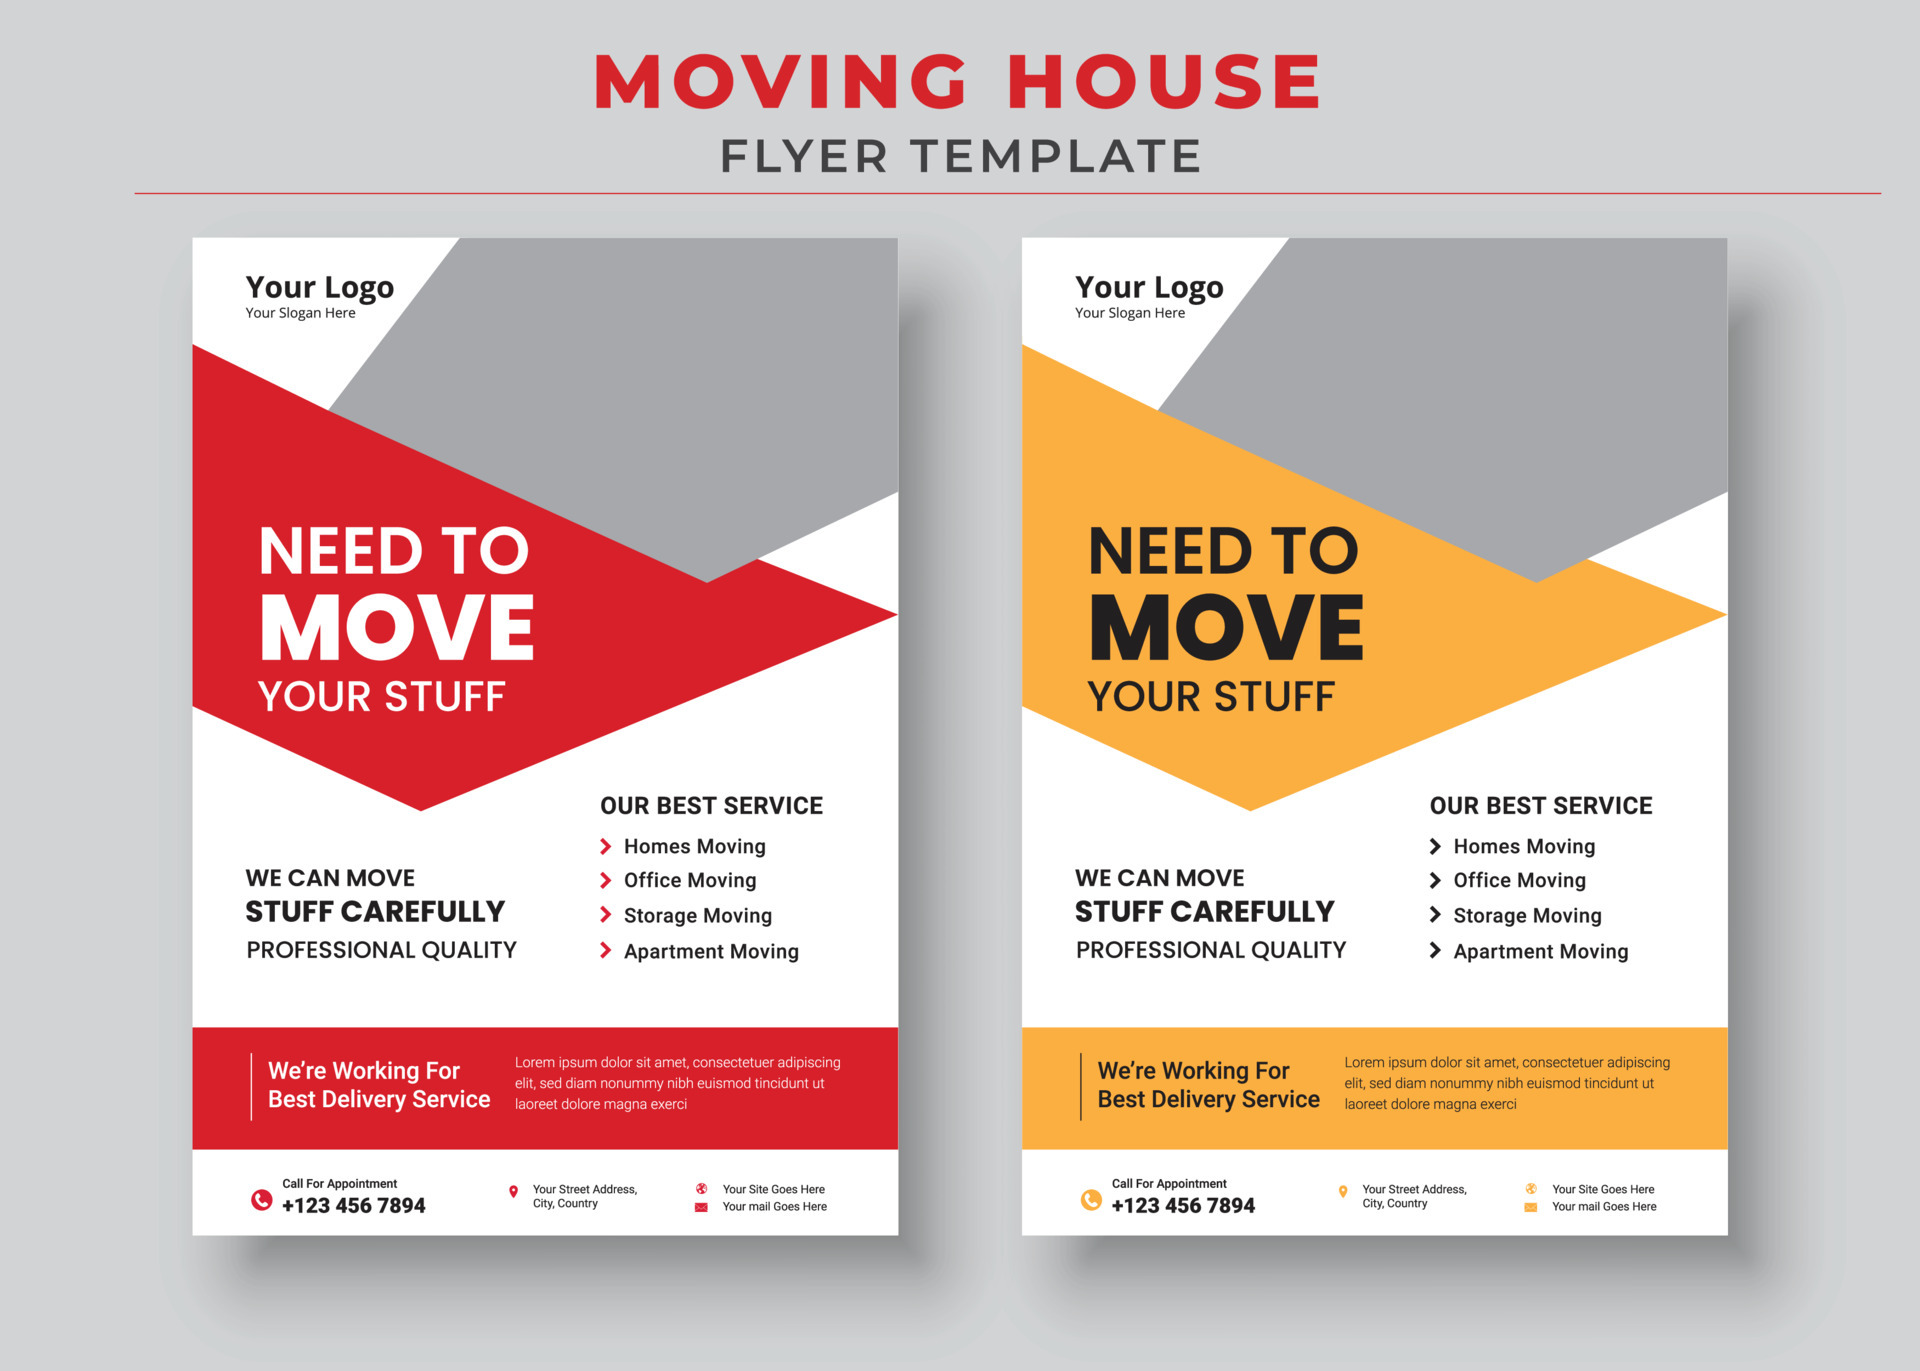 Moving House Flyer Templates, Need To Move Flyer, Moving Made Fast With Regard To Moving Flyer Template